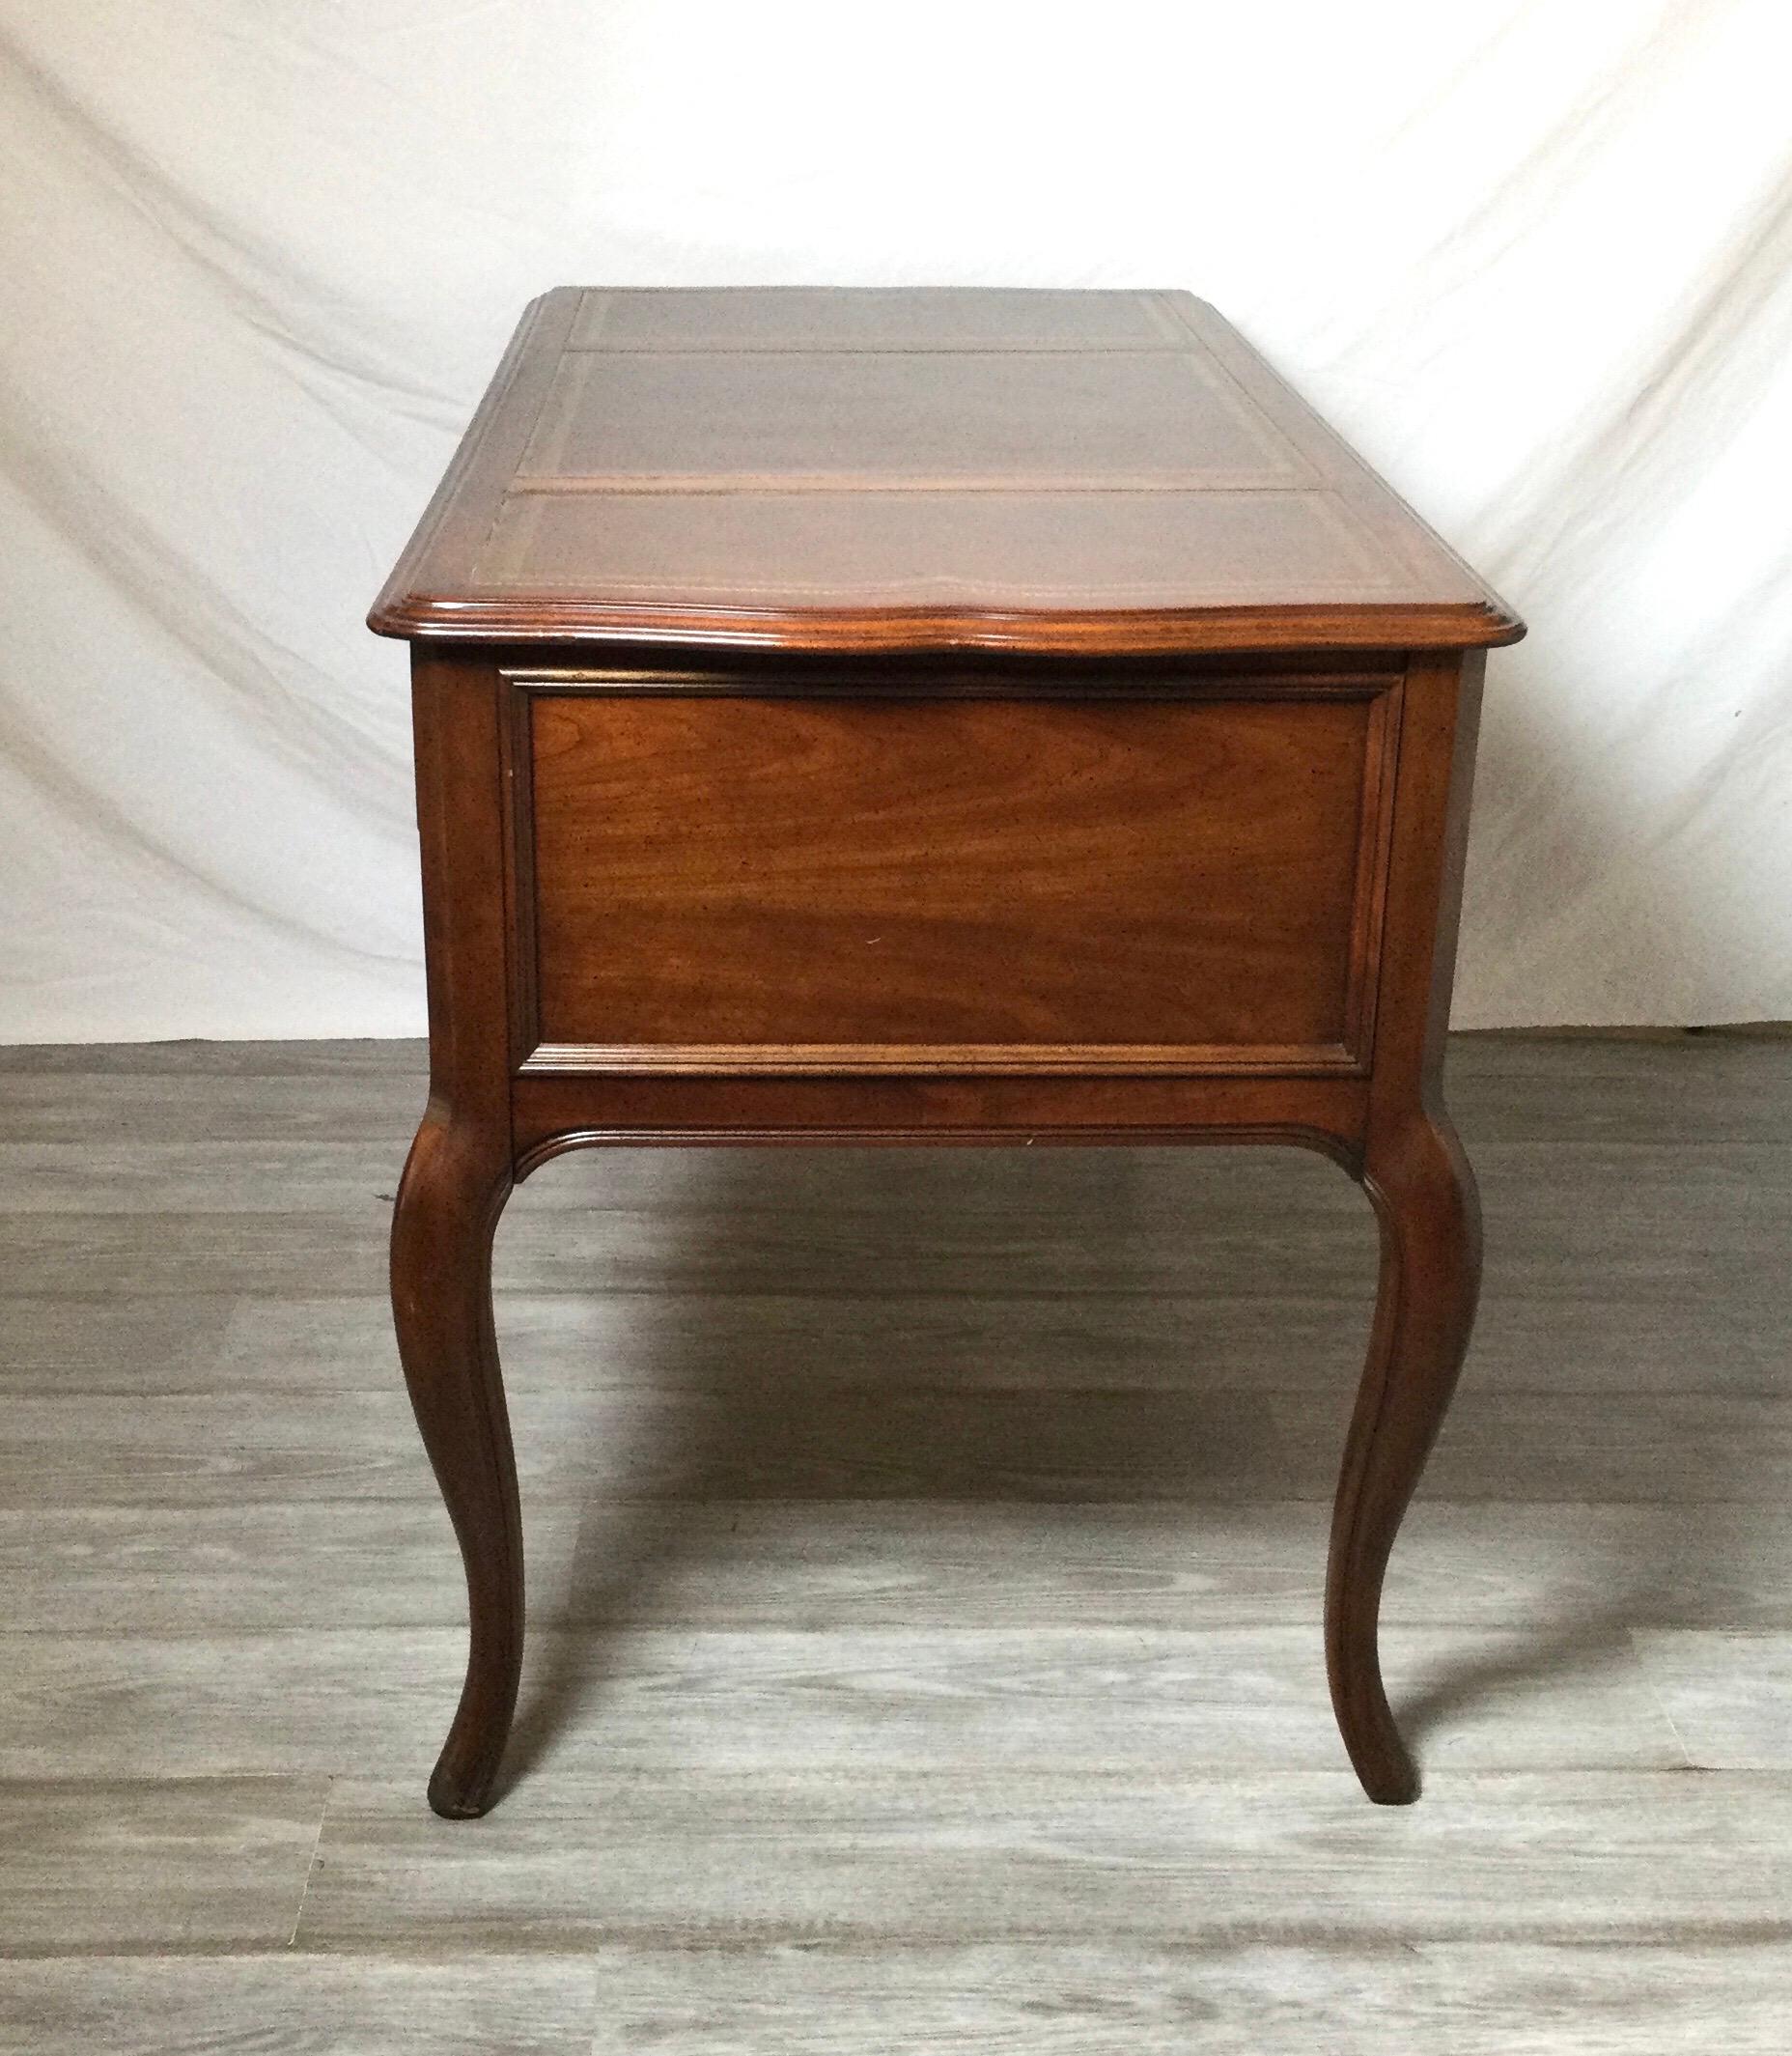 20th Century Circa 1960's Mid-Century Leather Top Walnut Desk by Sligh Furniture Co. Chicago For Sale